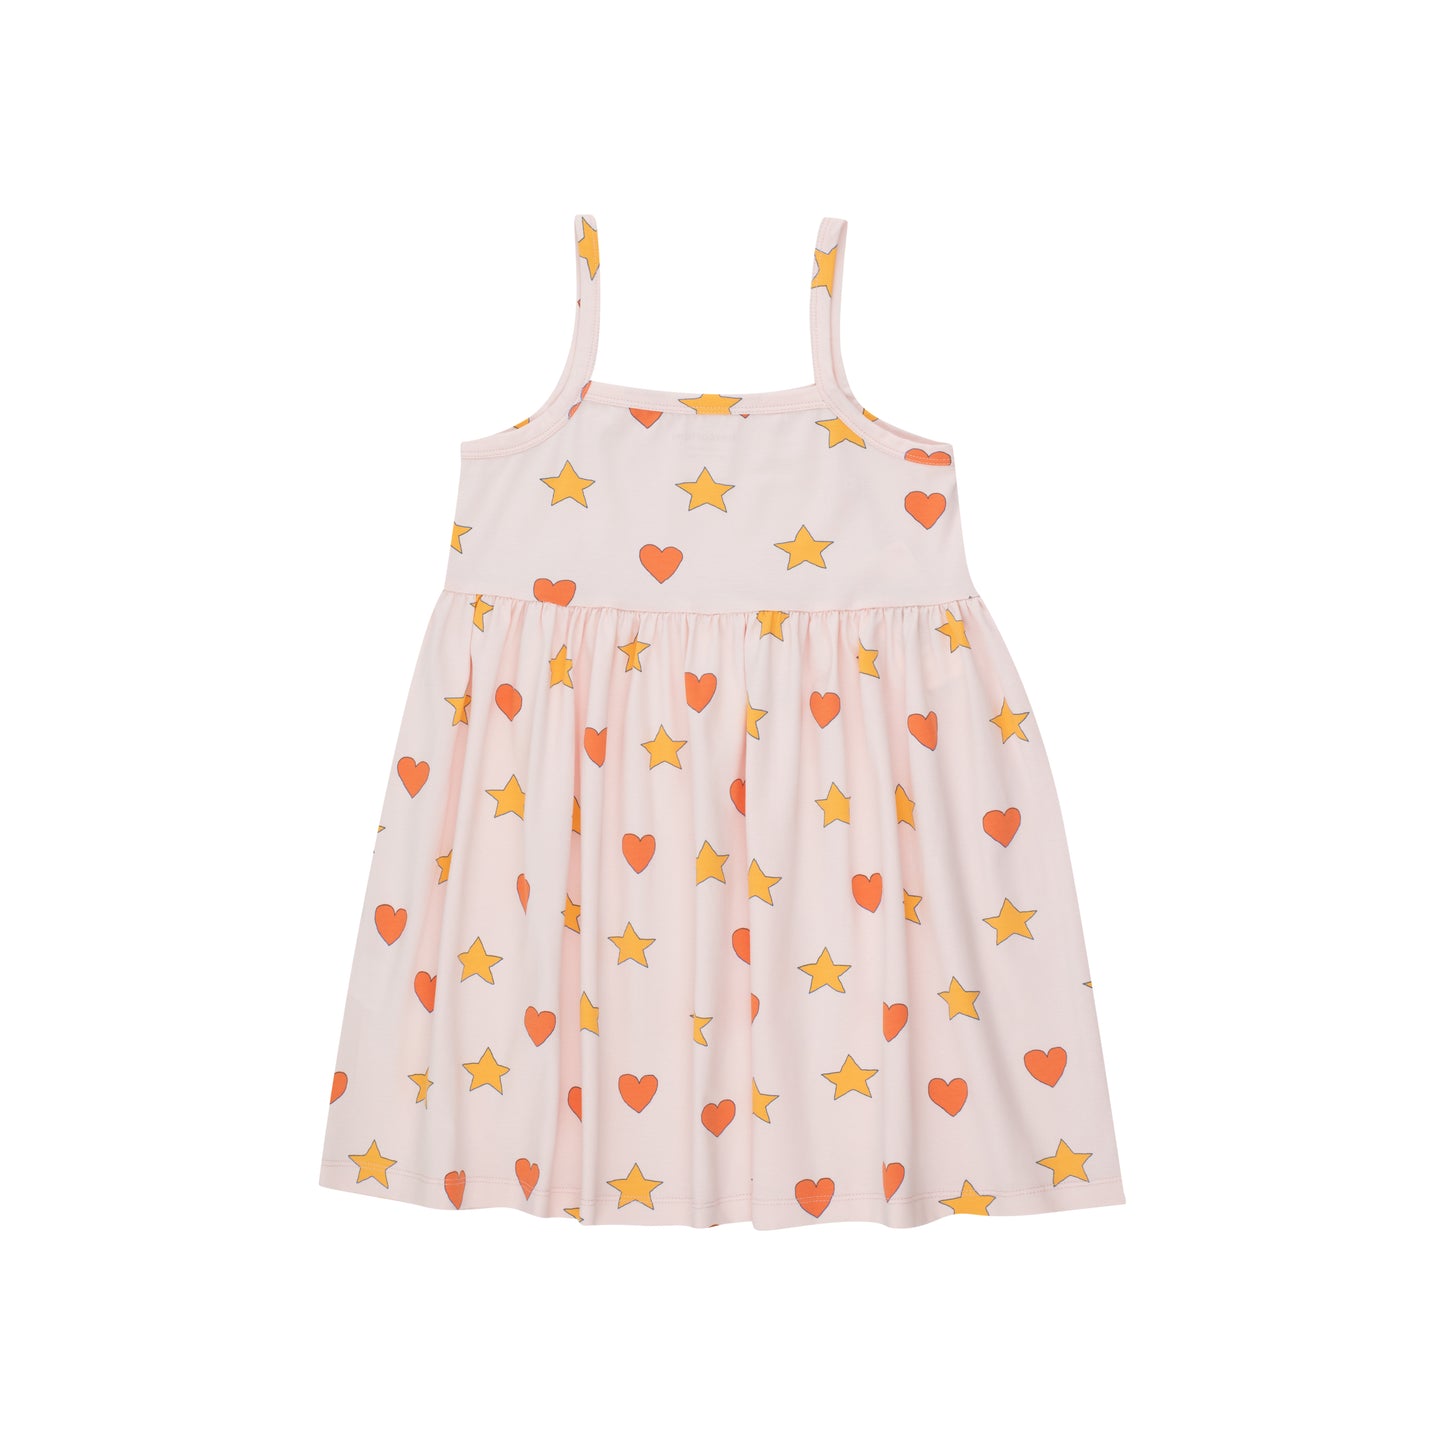 TINYCOTTONS Hearts Stars Dress ALWAYS SHOW